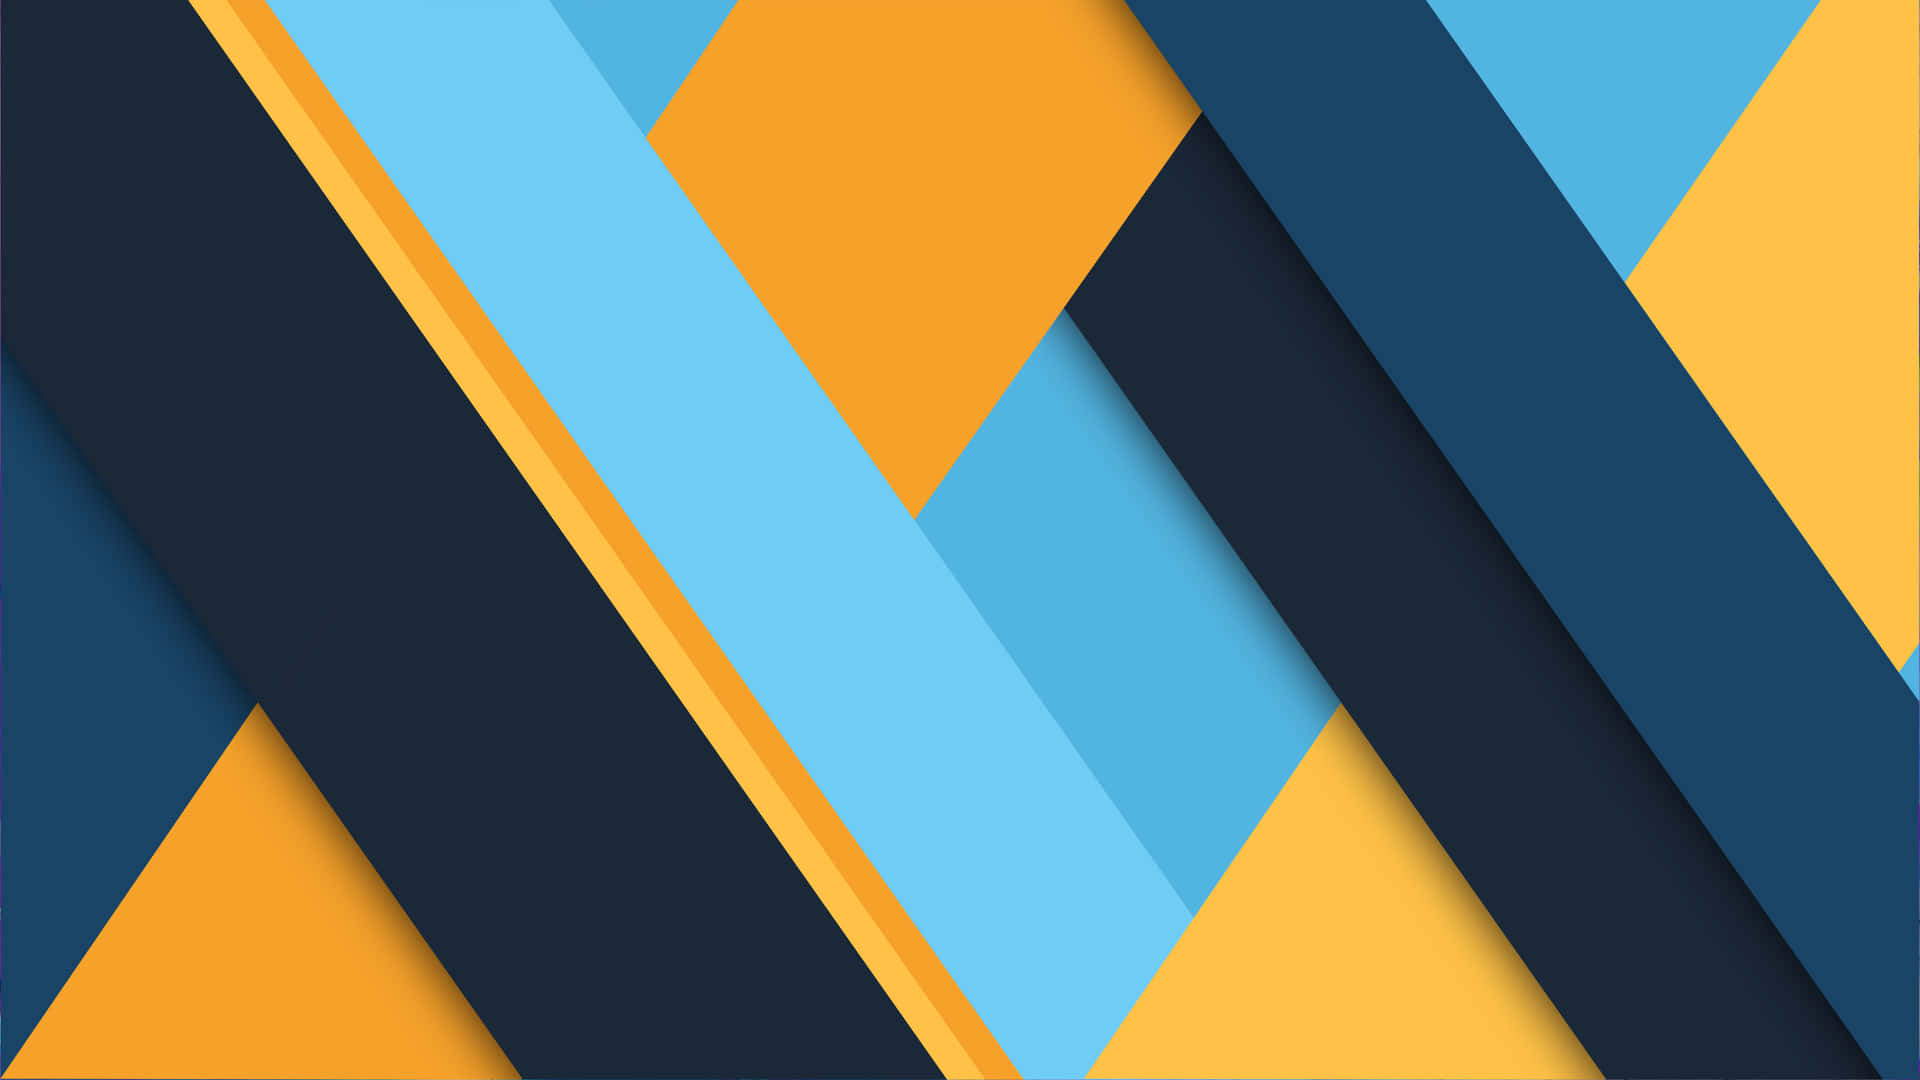 A vibrant blue and yellow material-inspired abstract design